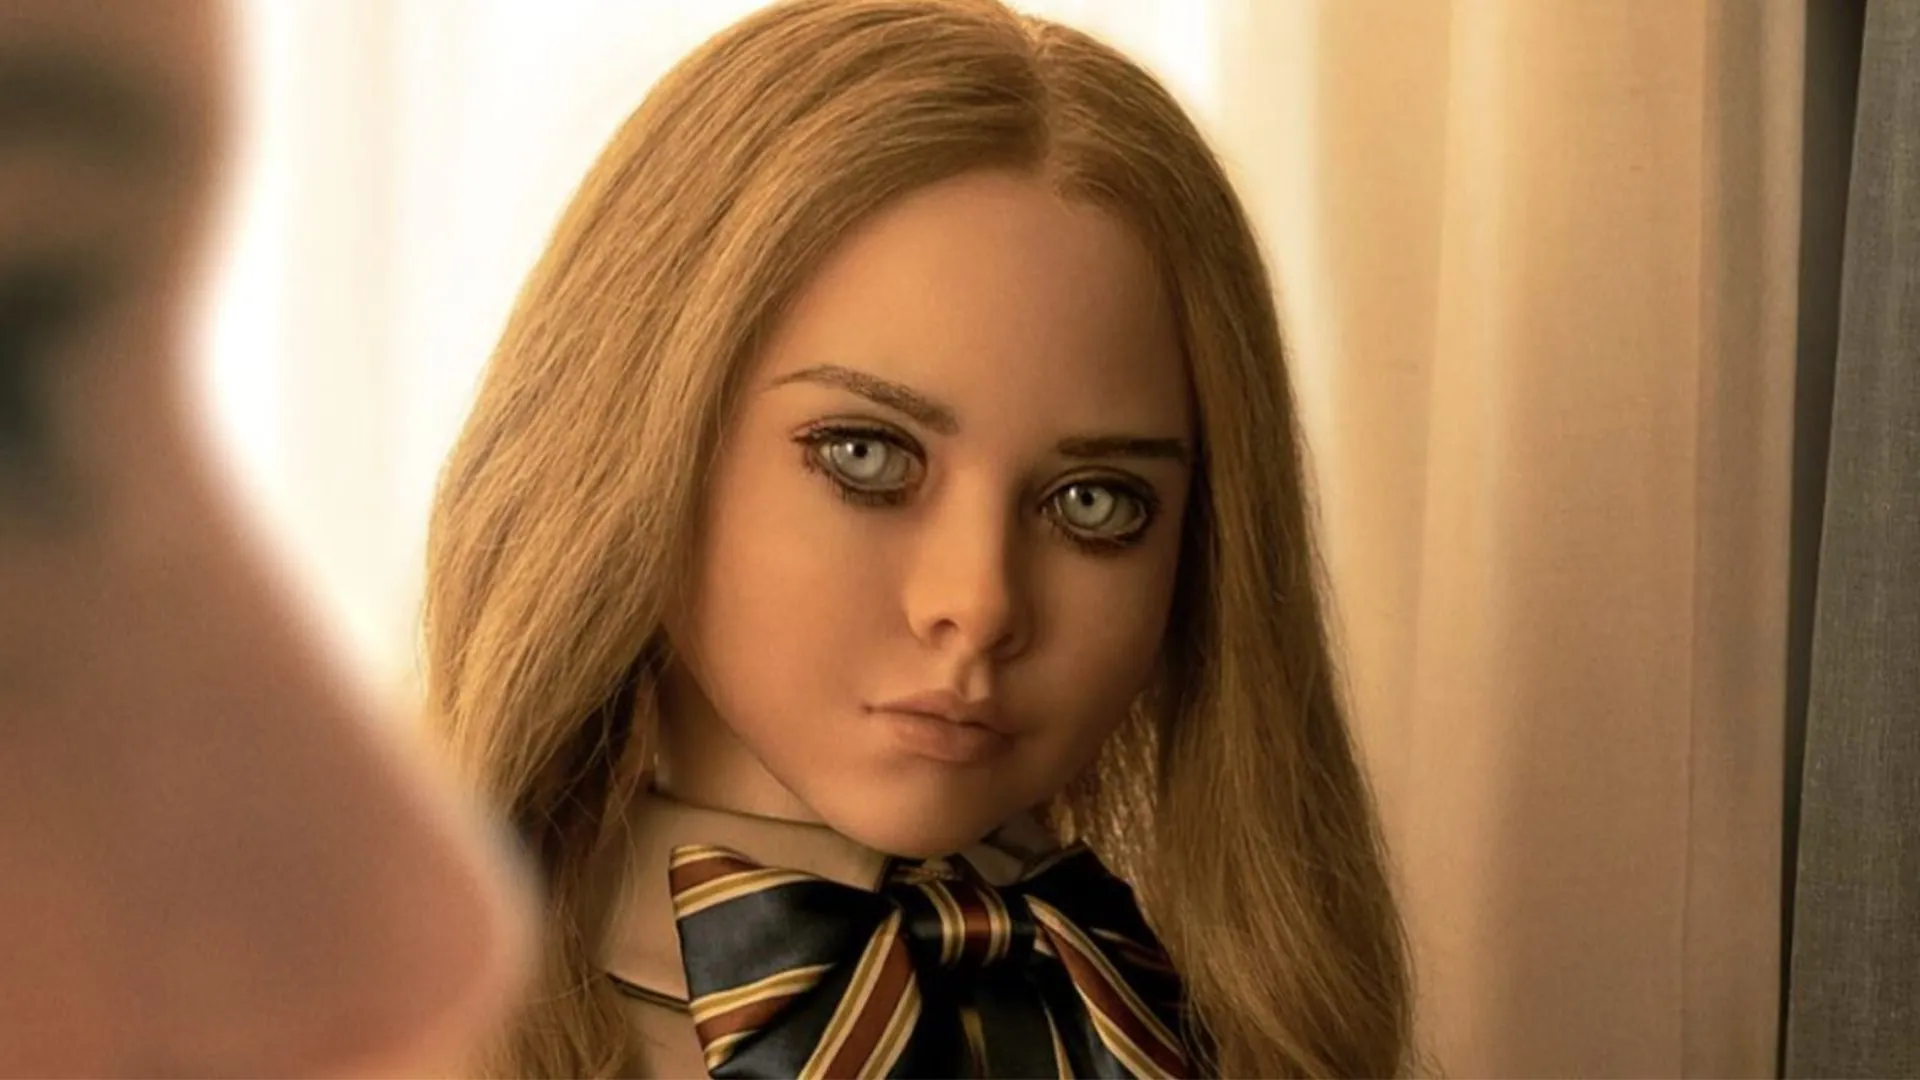 Universal Pictures Reveals Trailer For M3GAN, The Killer Doll